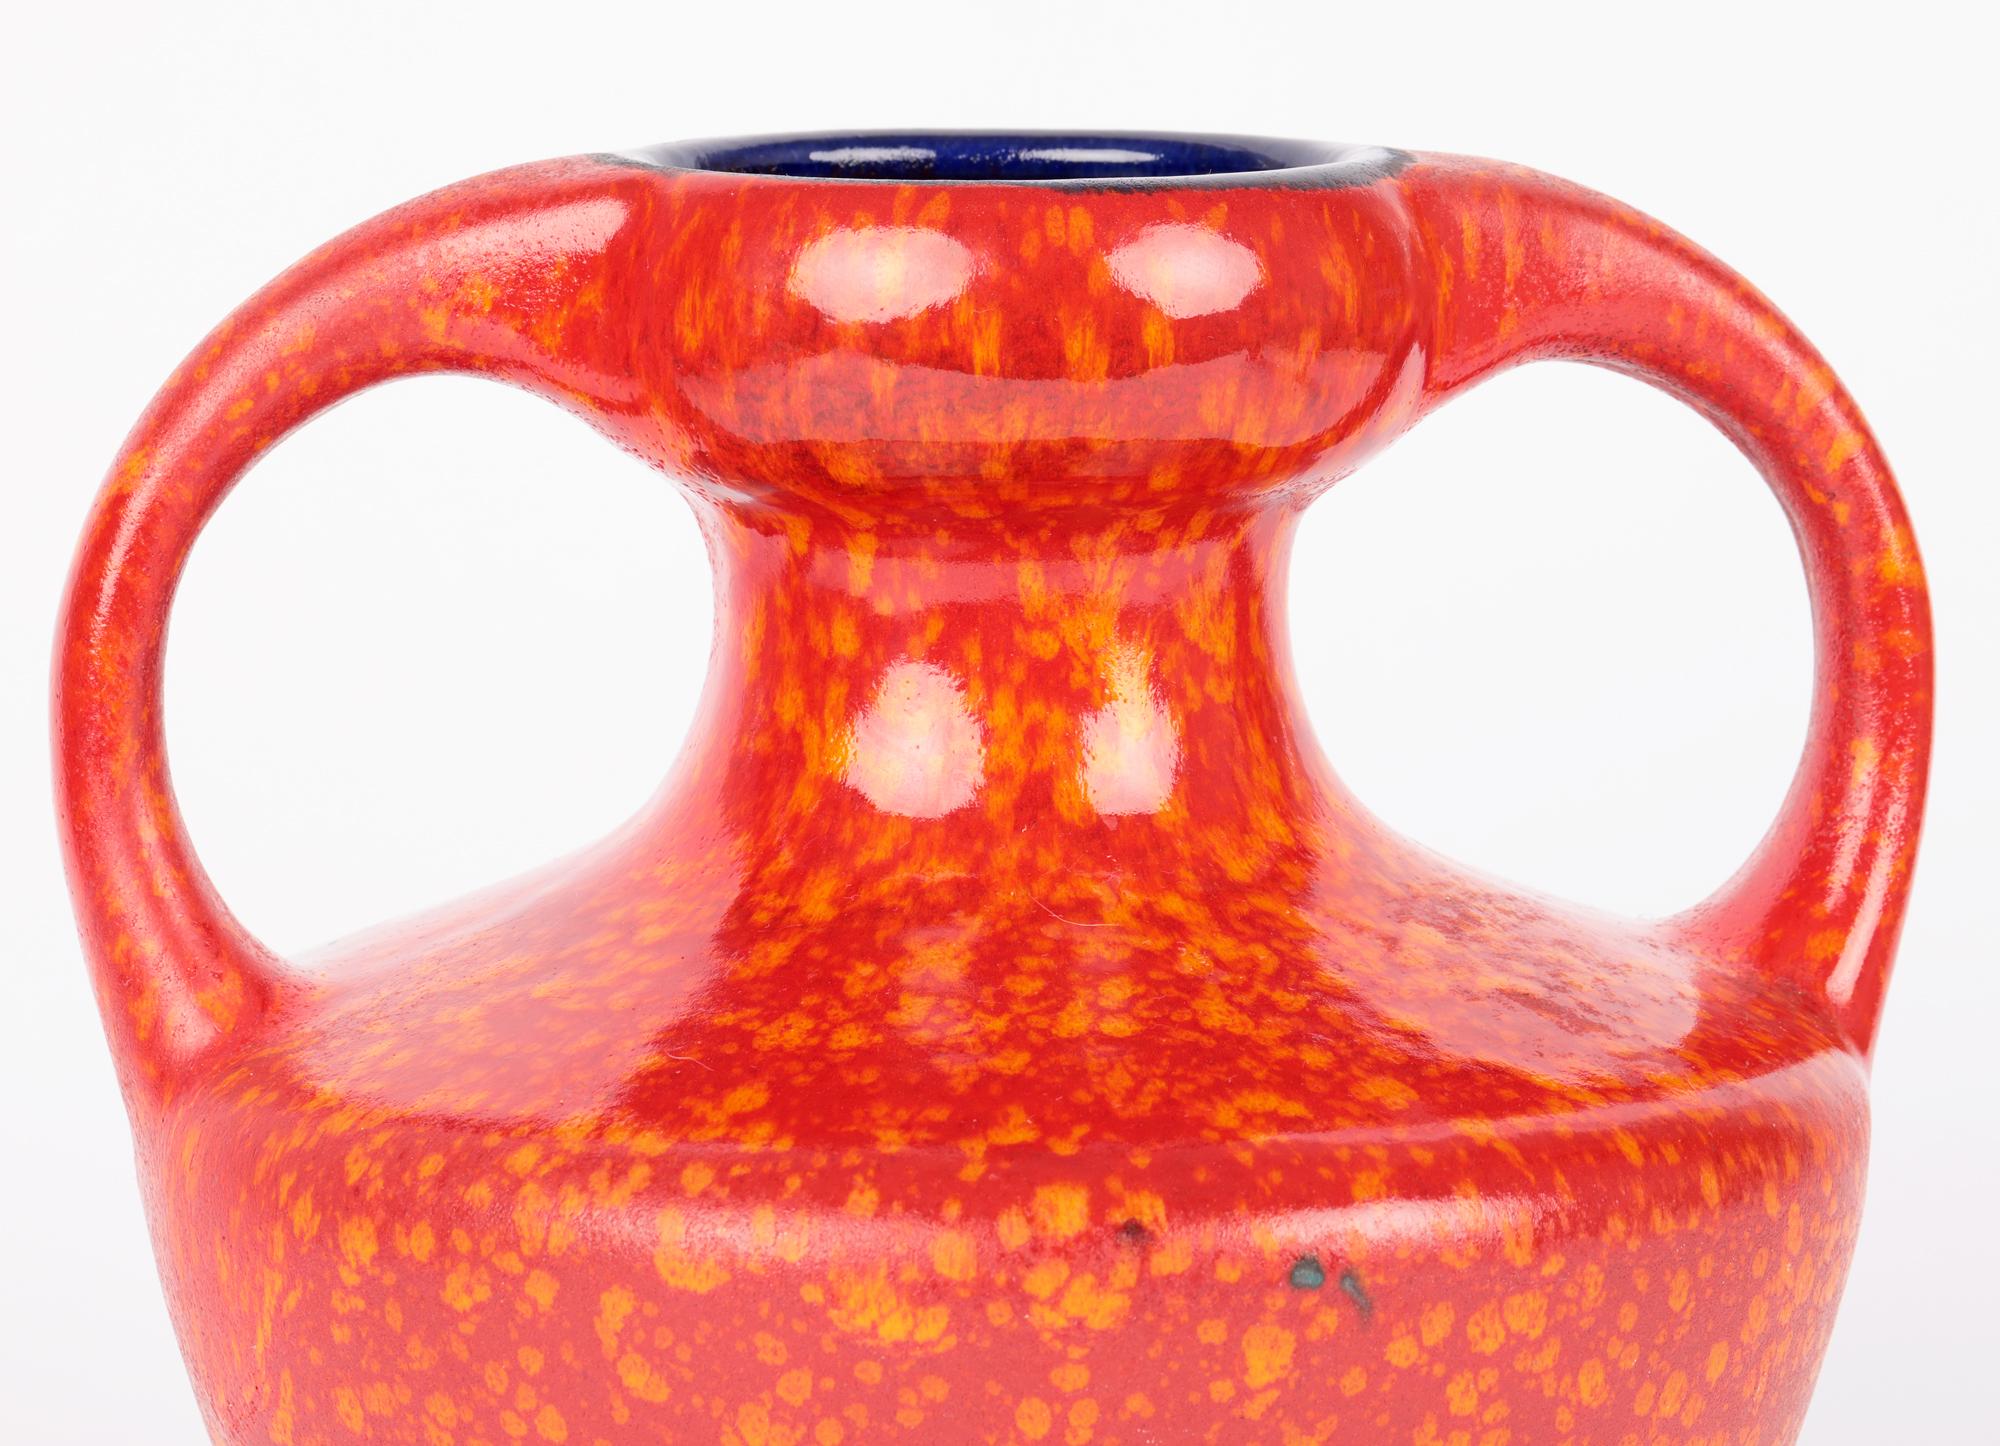 A very stylish West German midcentury mottle red and orange glazed twin handle art pottery vase. The red stoneware vase stands on a narrow round unglazed foot and is of wide round bulbous shape with a narrow pinched neck and raised wide shallow bowl